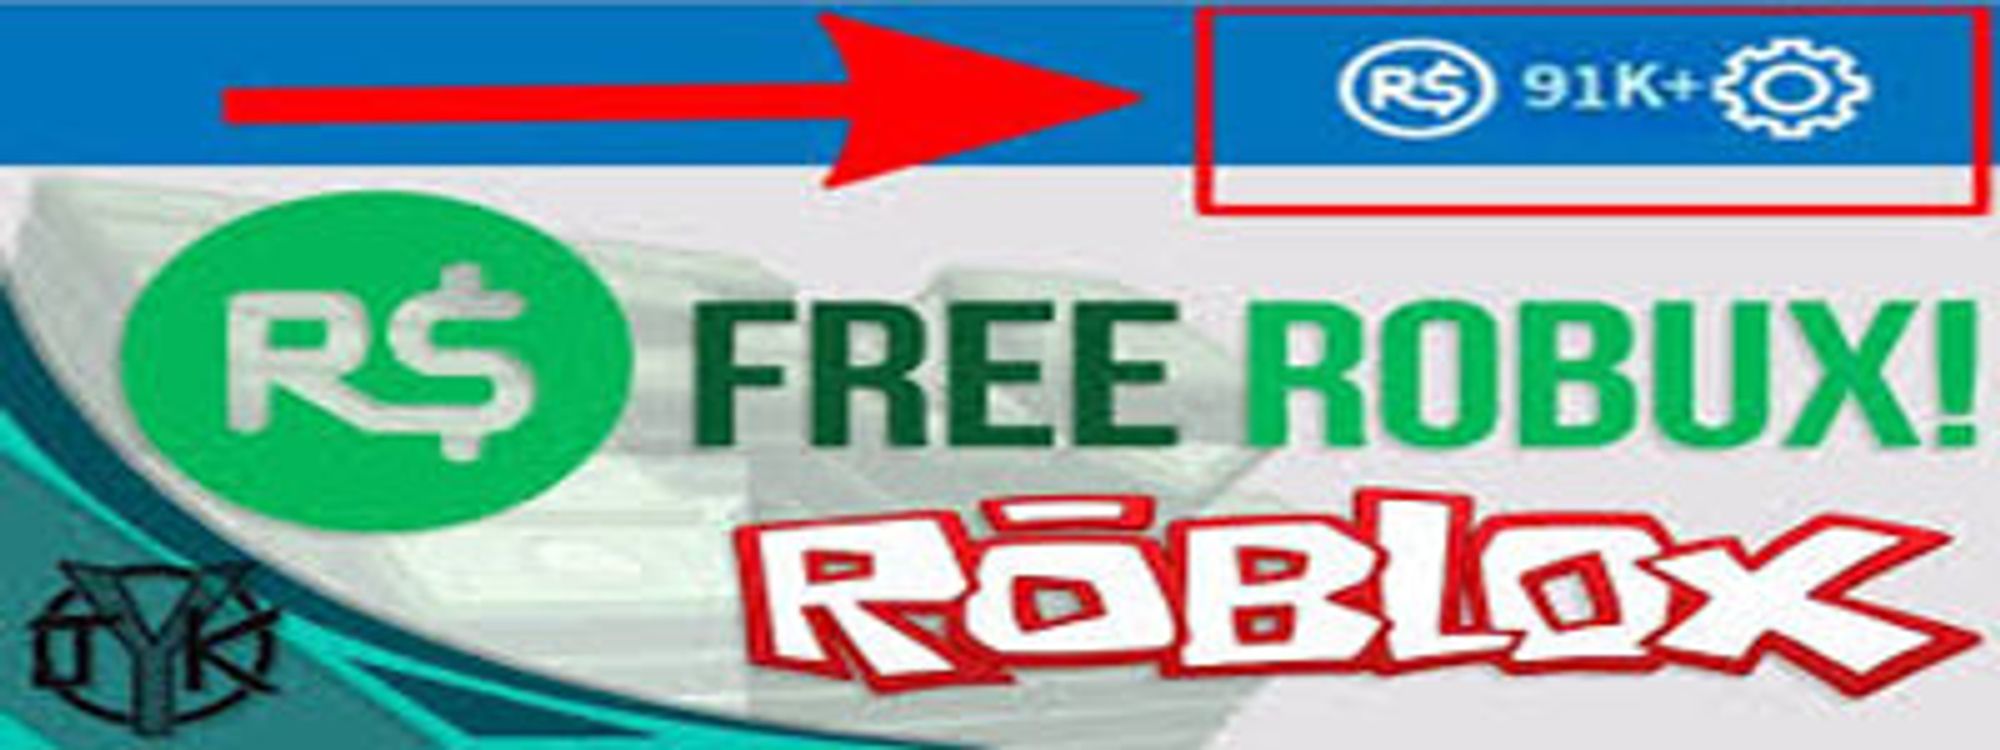 How To Get Free Robux In Your Ipad